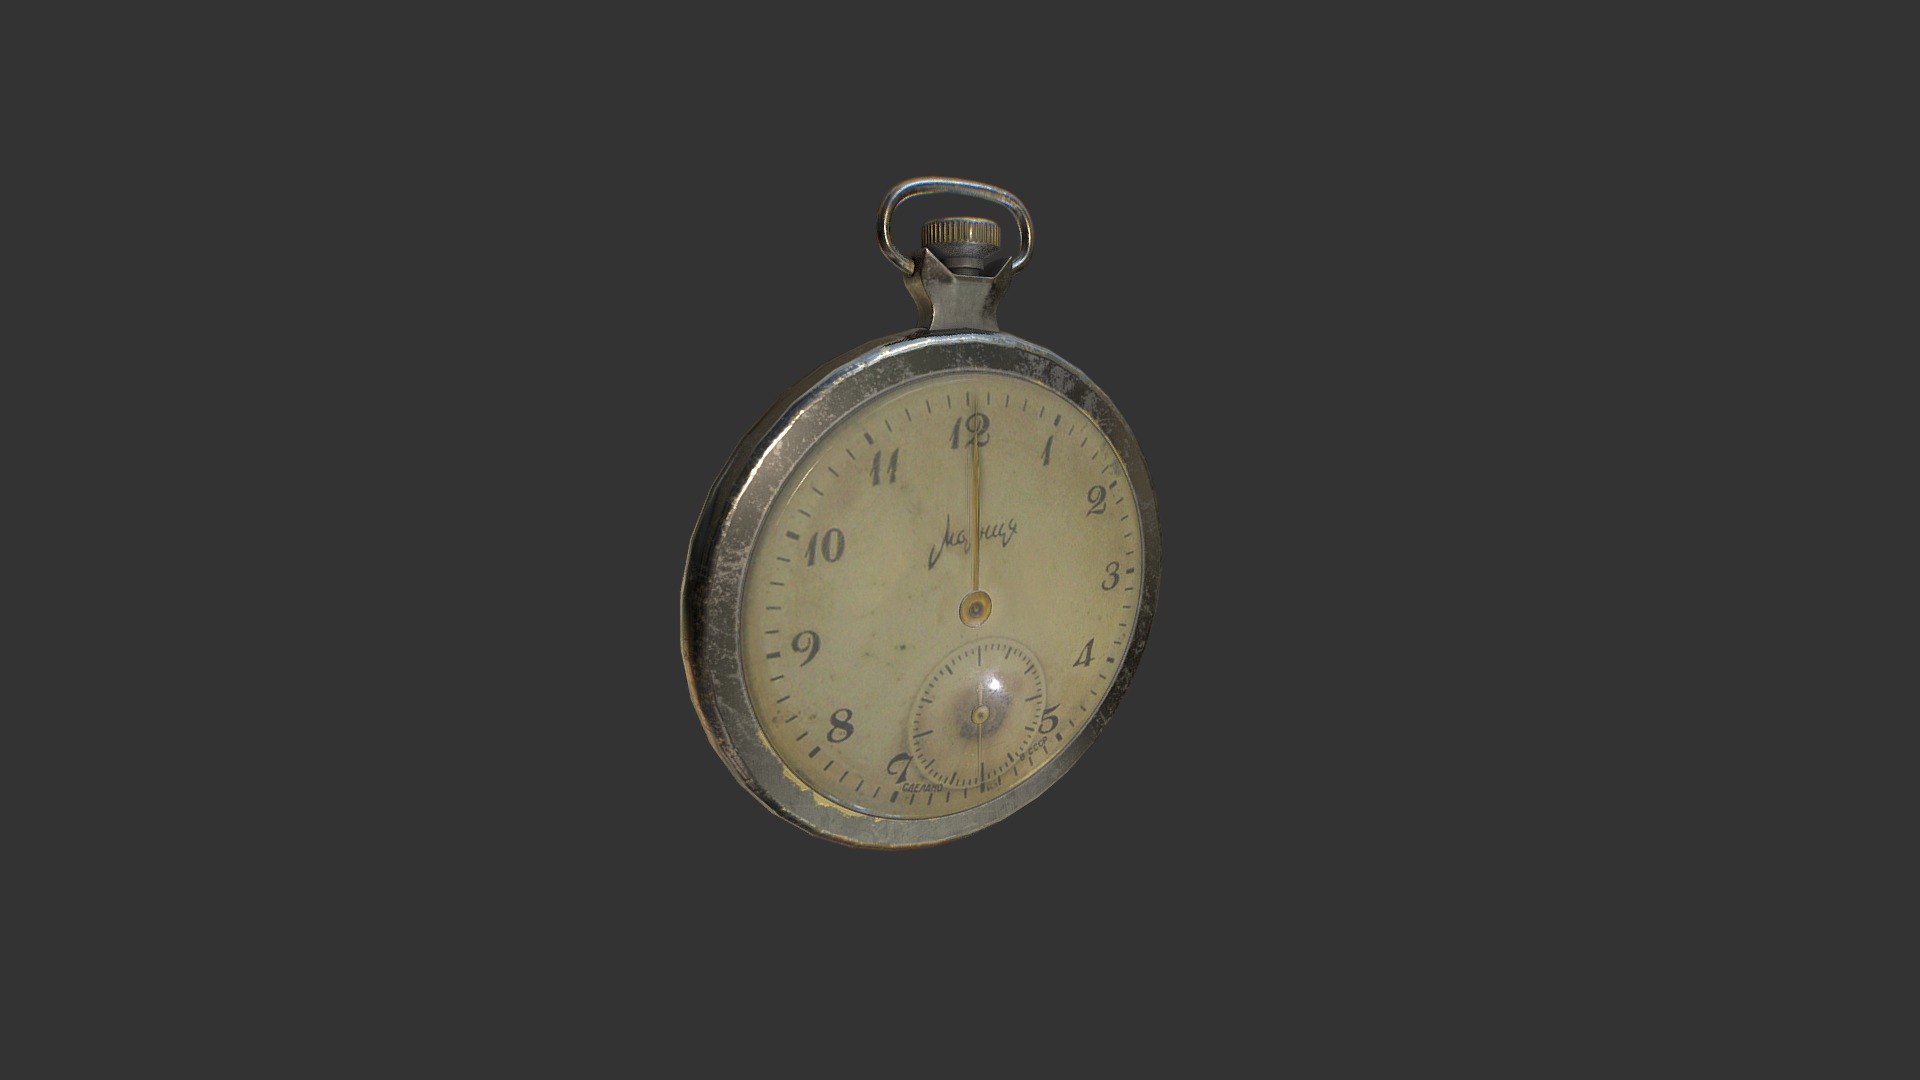 3D model Old Watch - This is a 3D model of the Old Watch. The 3D model is about a pocket watch with a leather strap.